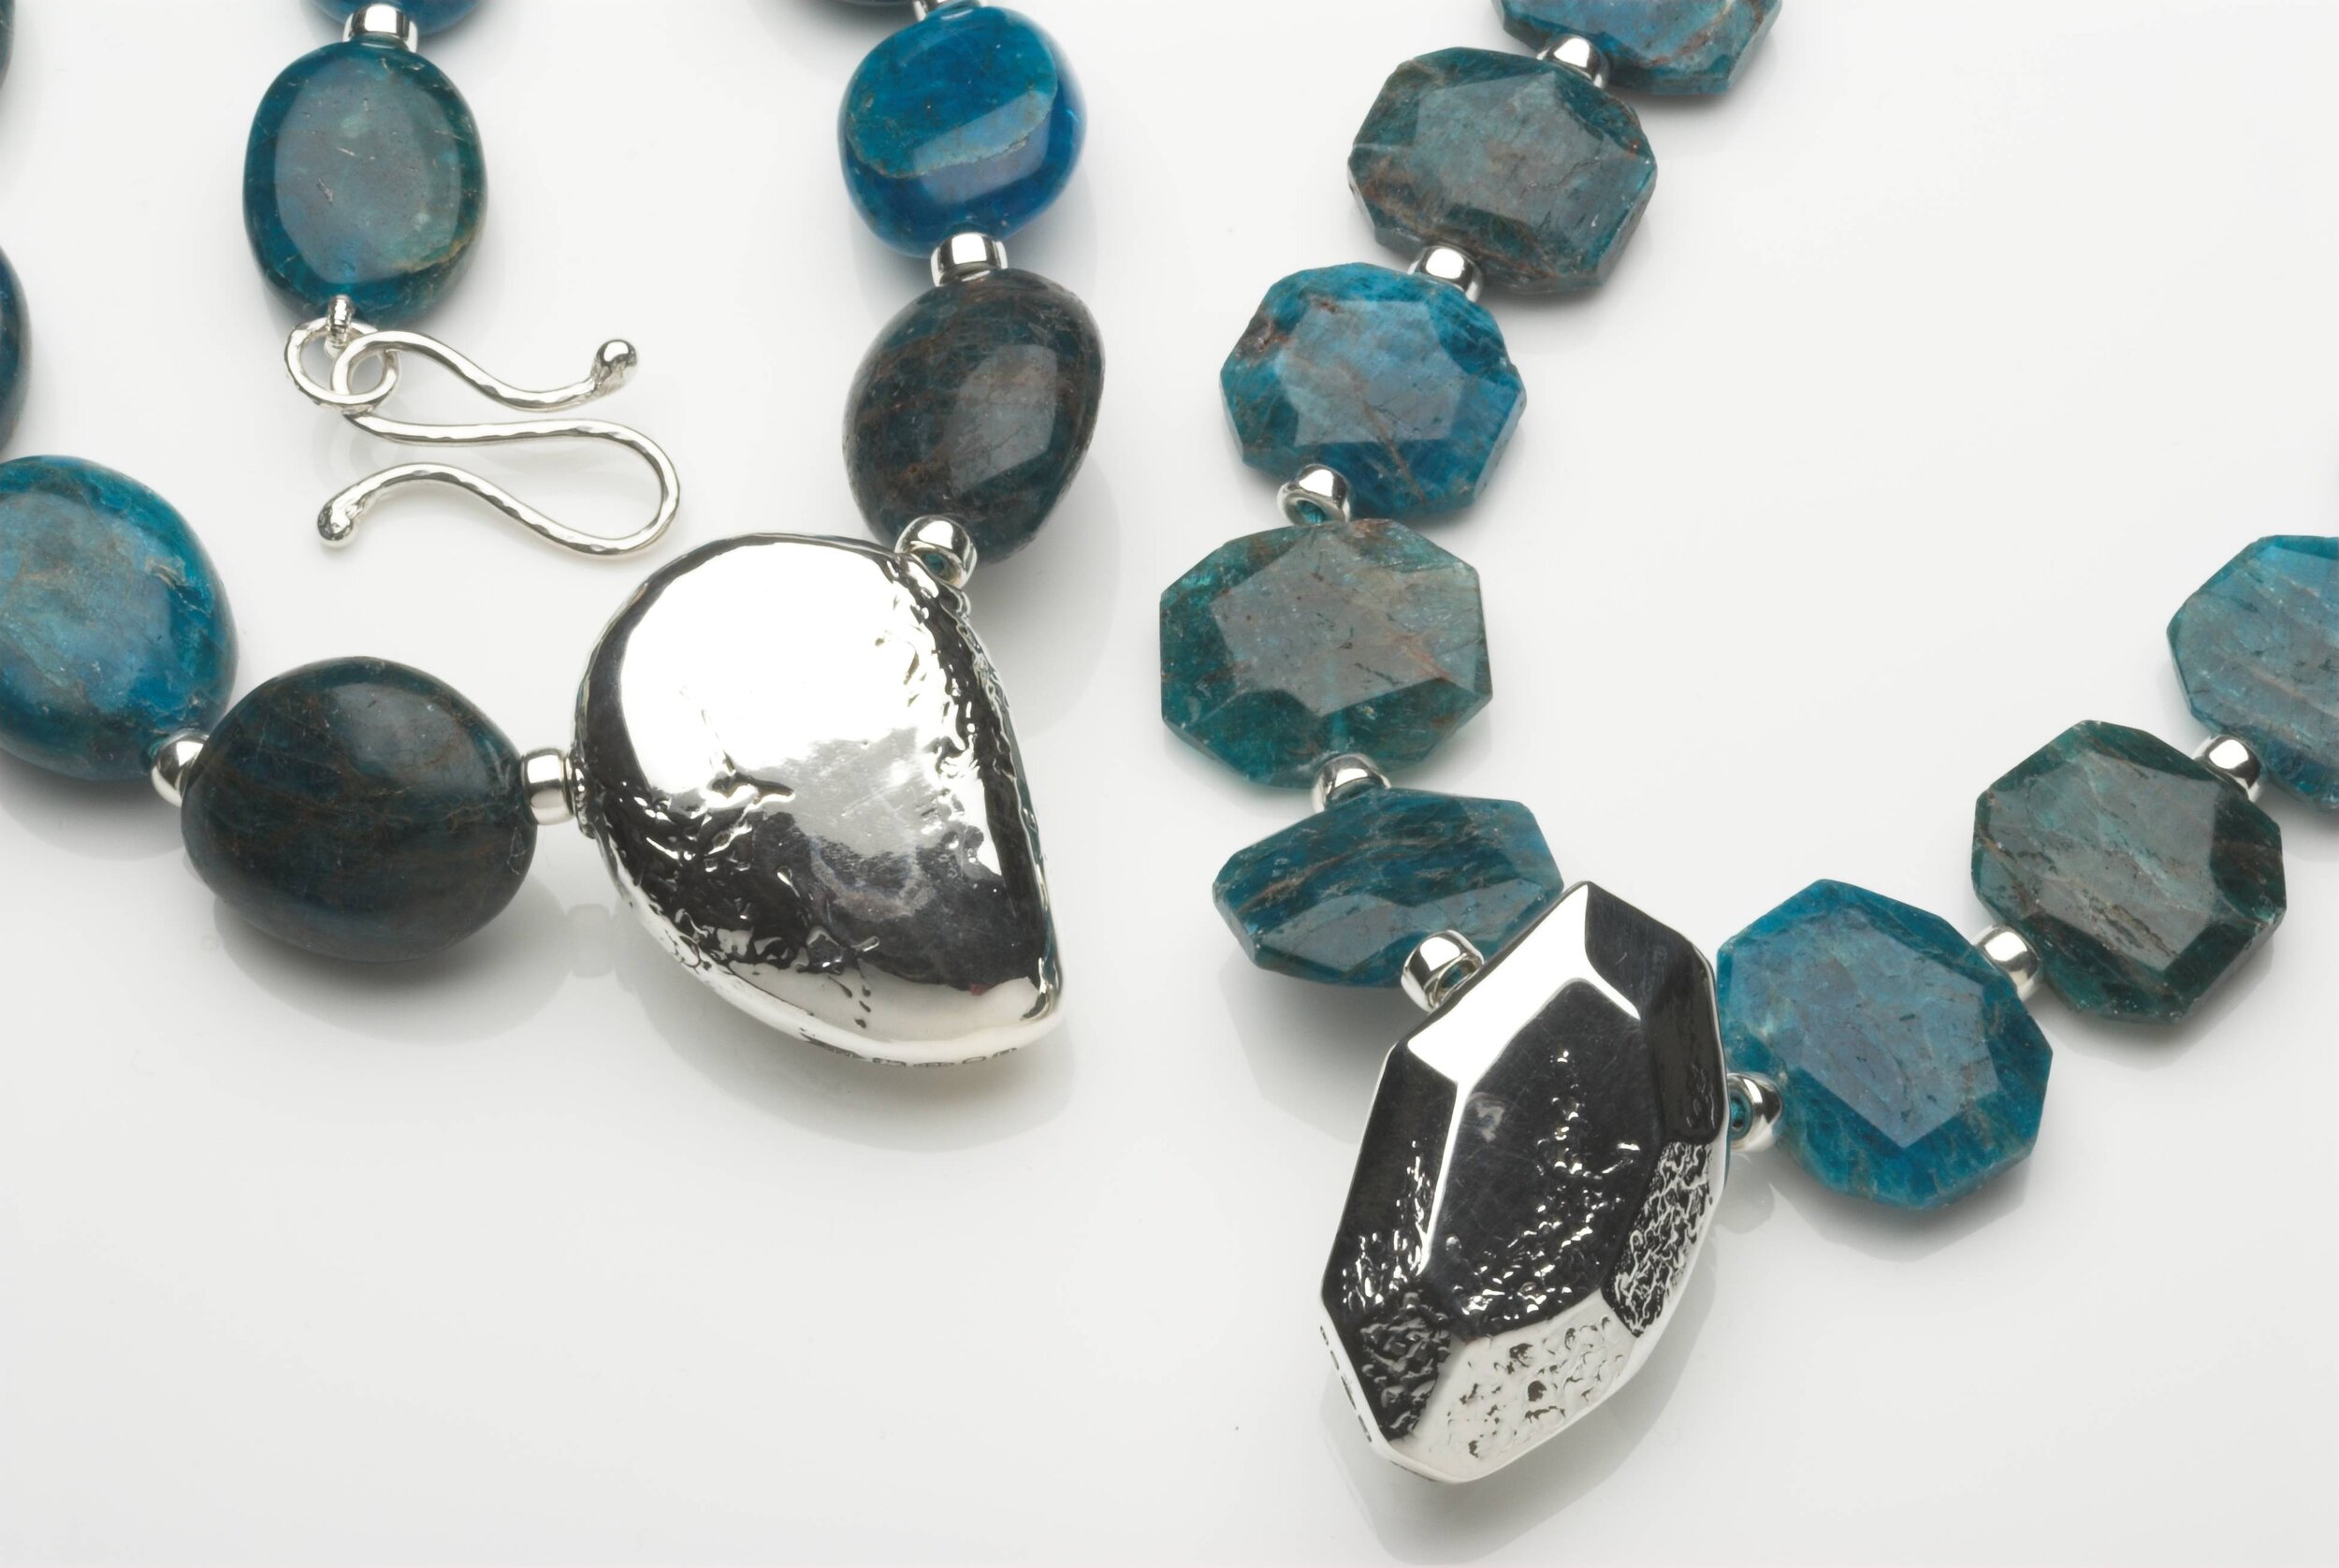 Organic and angular Apatite Necklaces with Silver hallmarked shaped Pendants £690 each.jpg